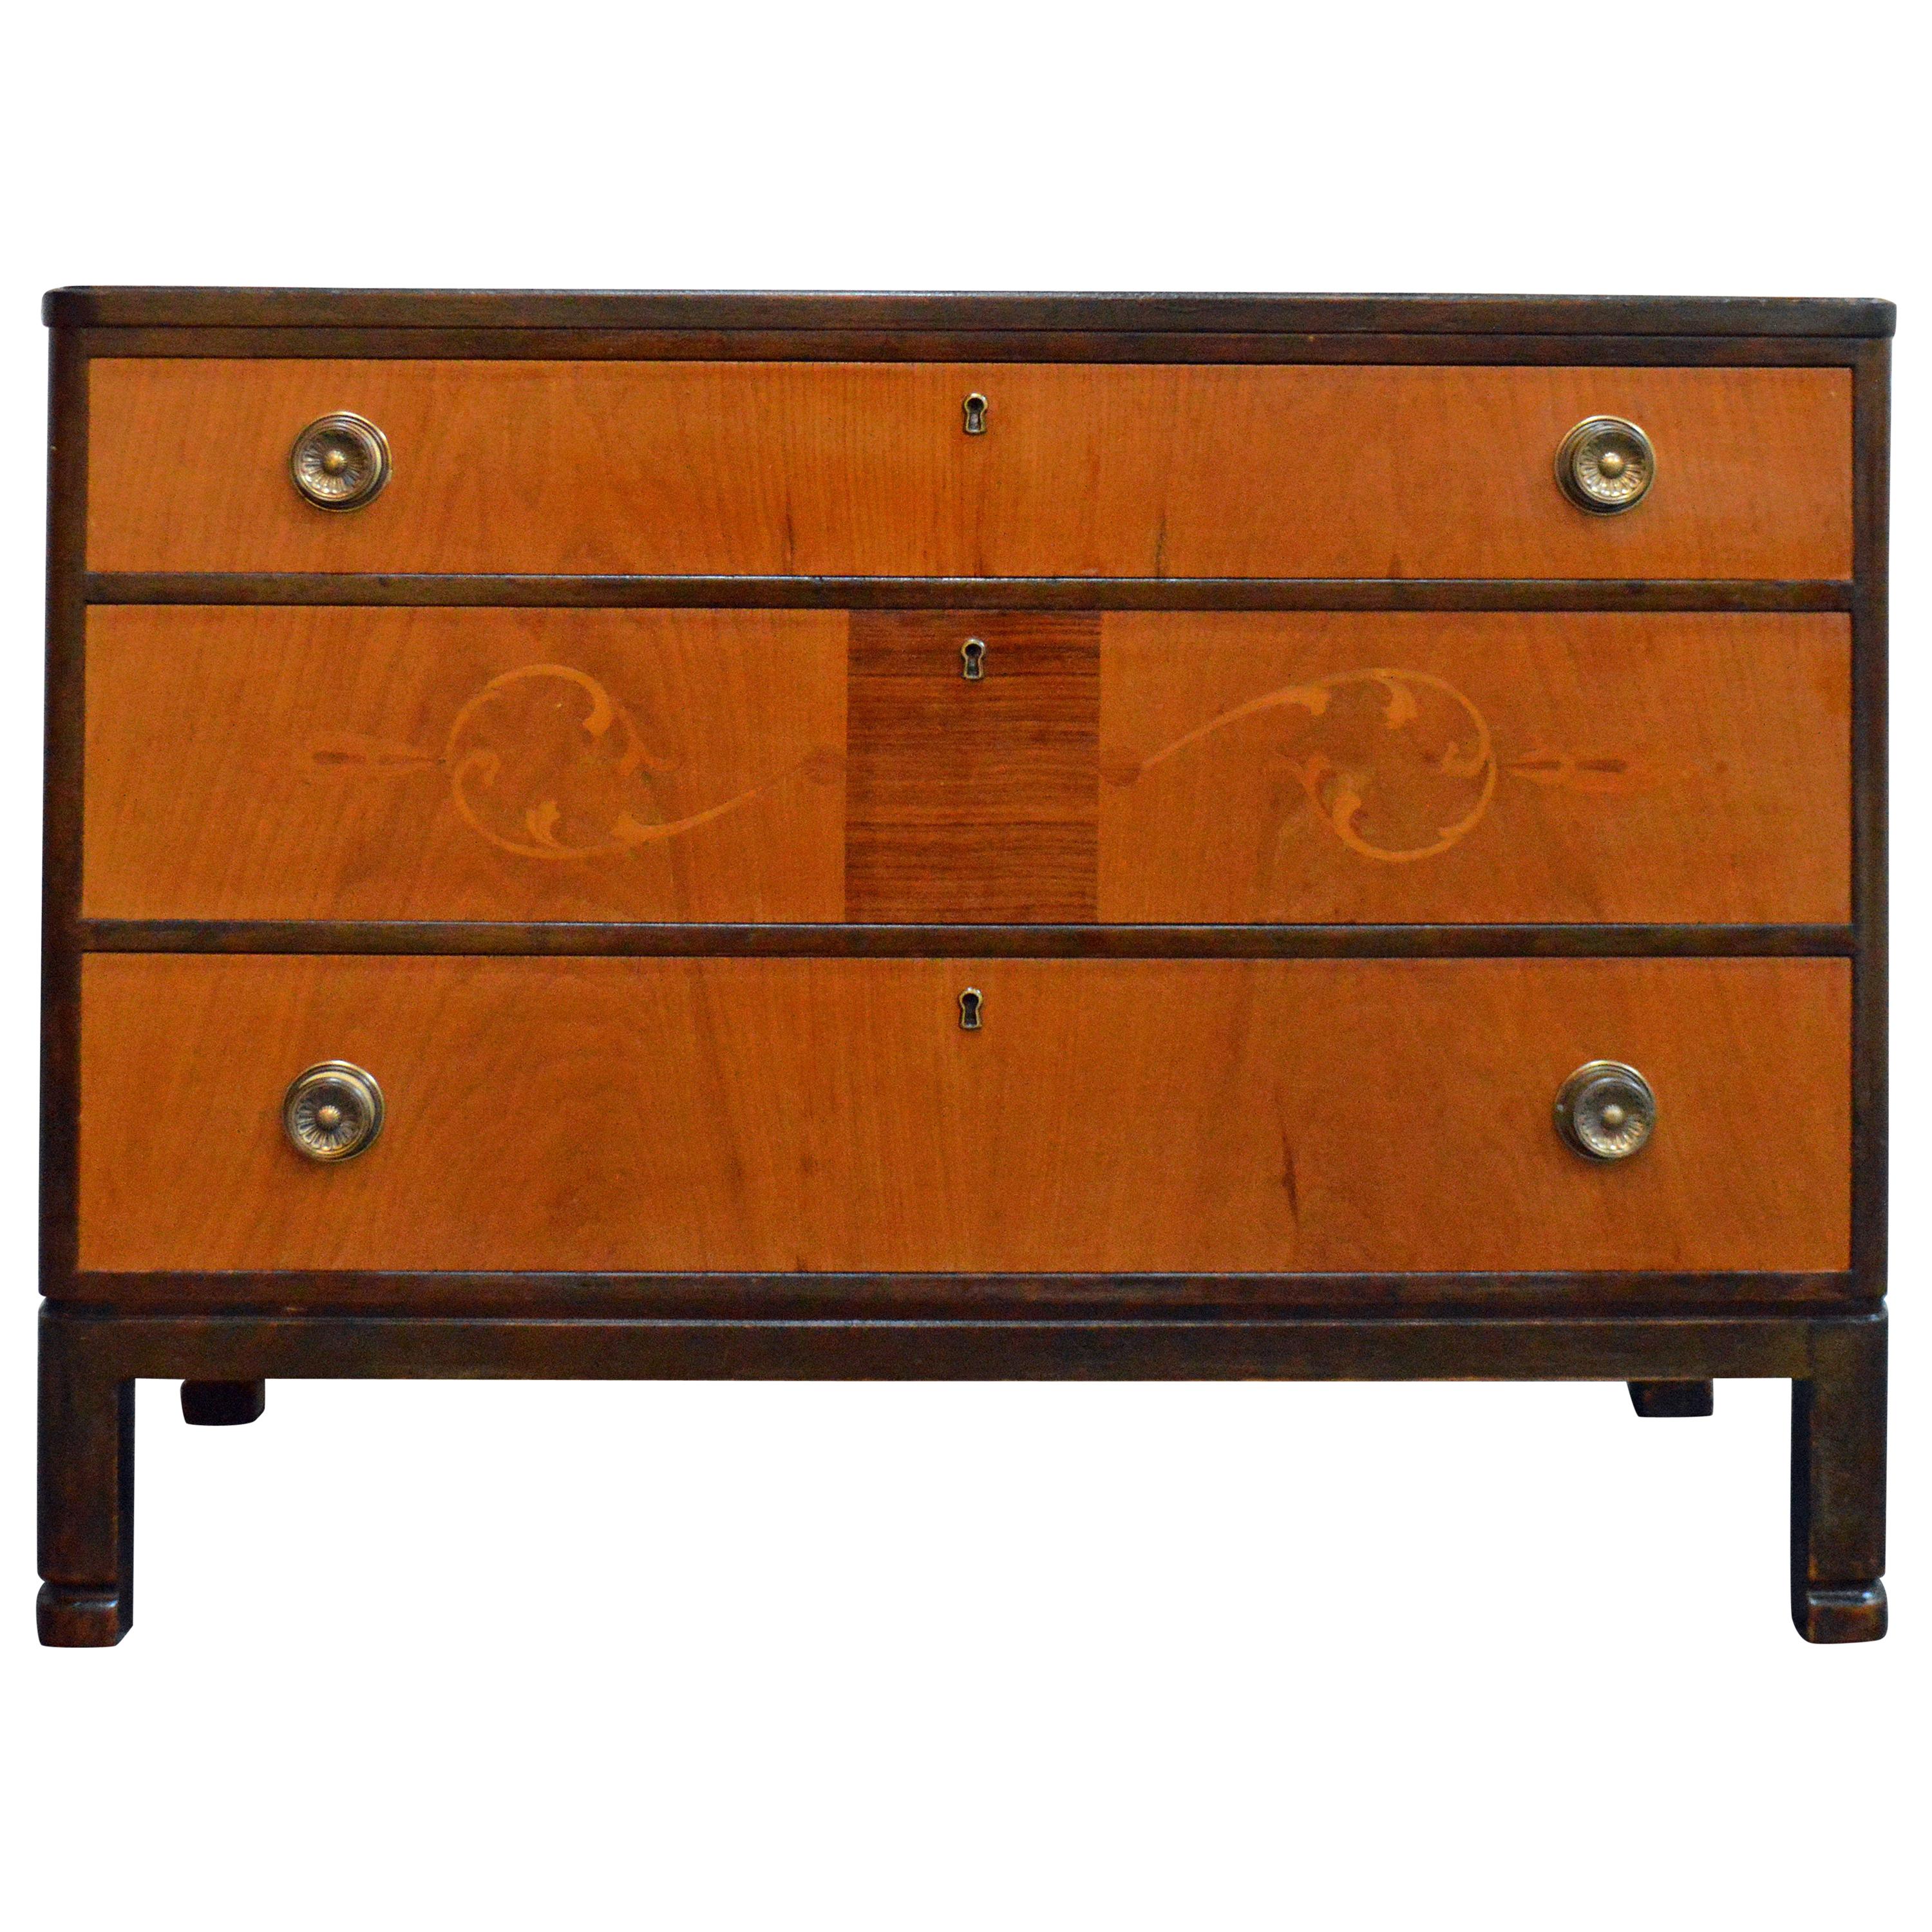 Swedish Grace Art Deco Intarsia Chest of Drawers or Commode